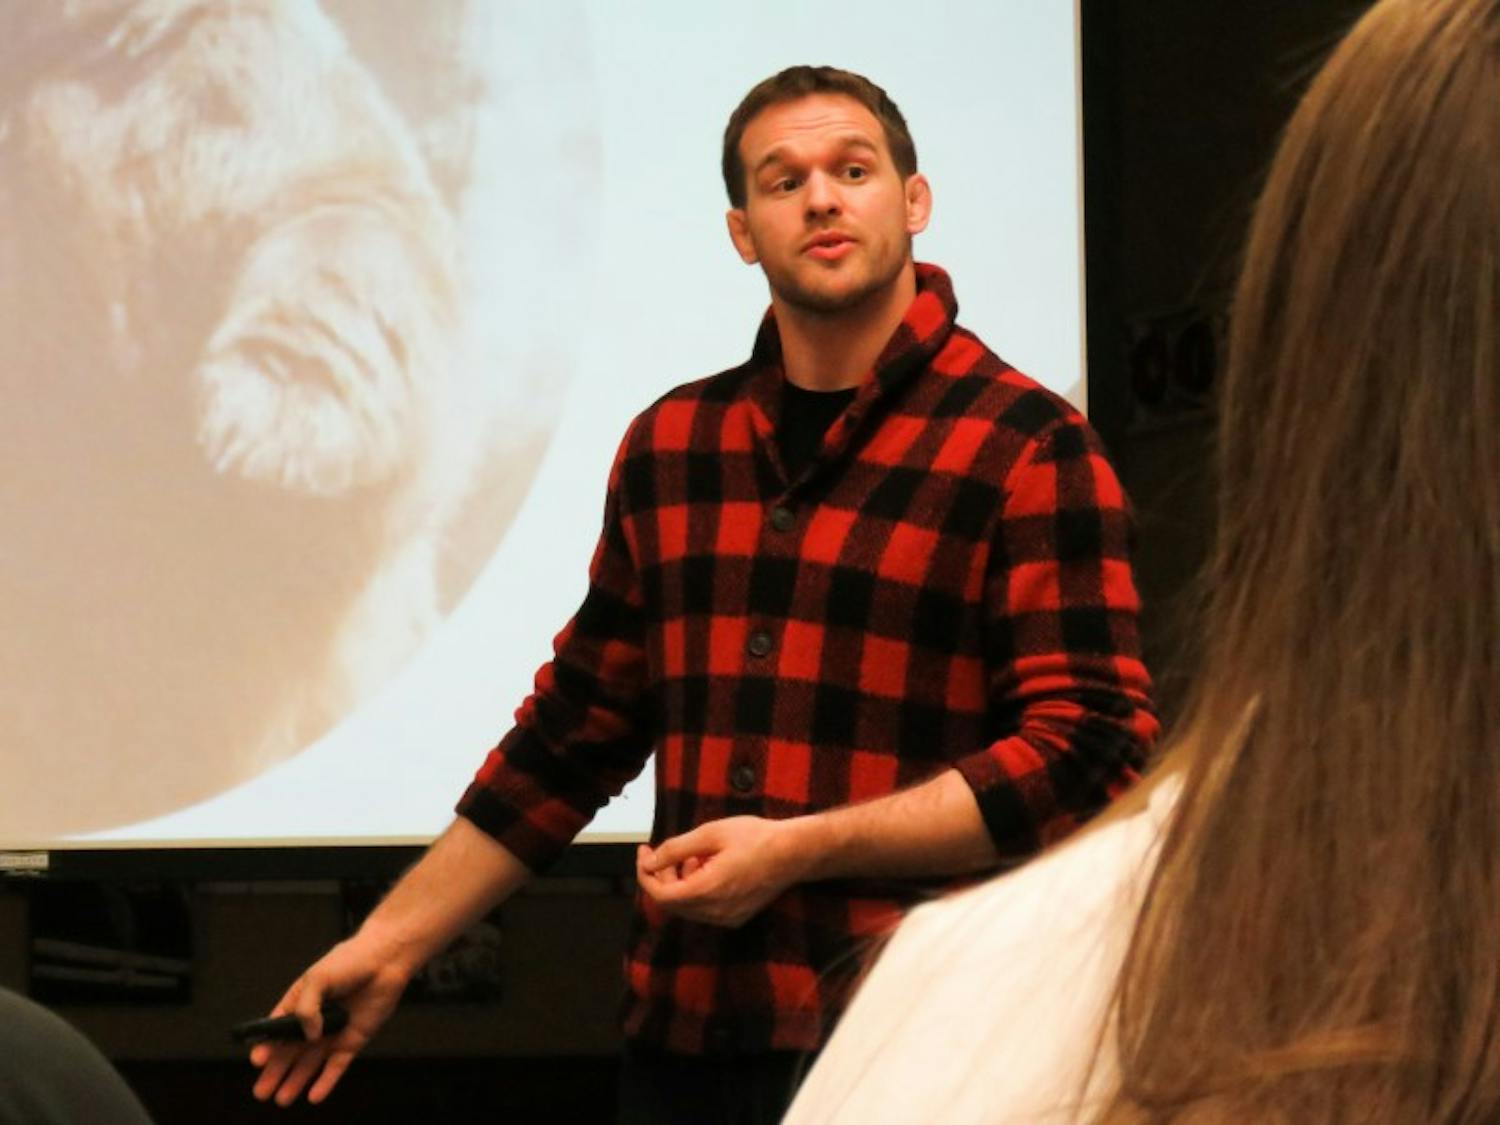 Former NCAA All-American wrestler and Columbia University wrestling coach Hudson Taylor discussed goals of his nonprofit organization, Athlete Ally, which advocates for support of people in sports for members of the LGBT community.